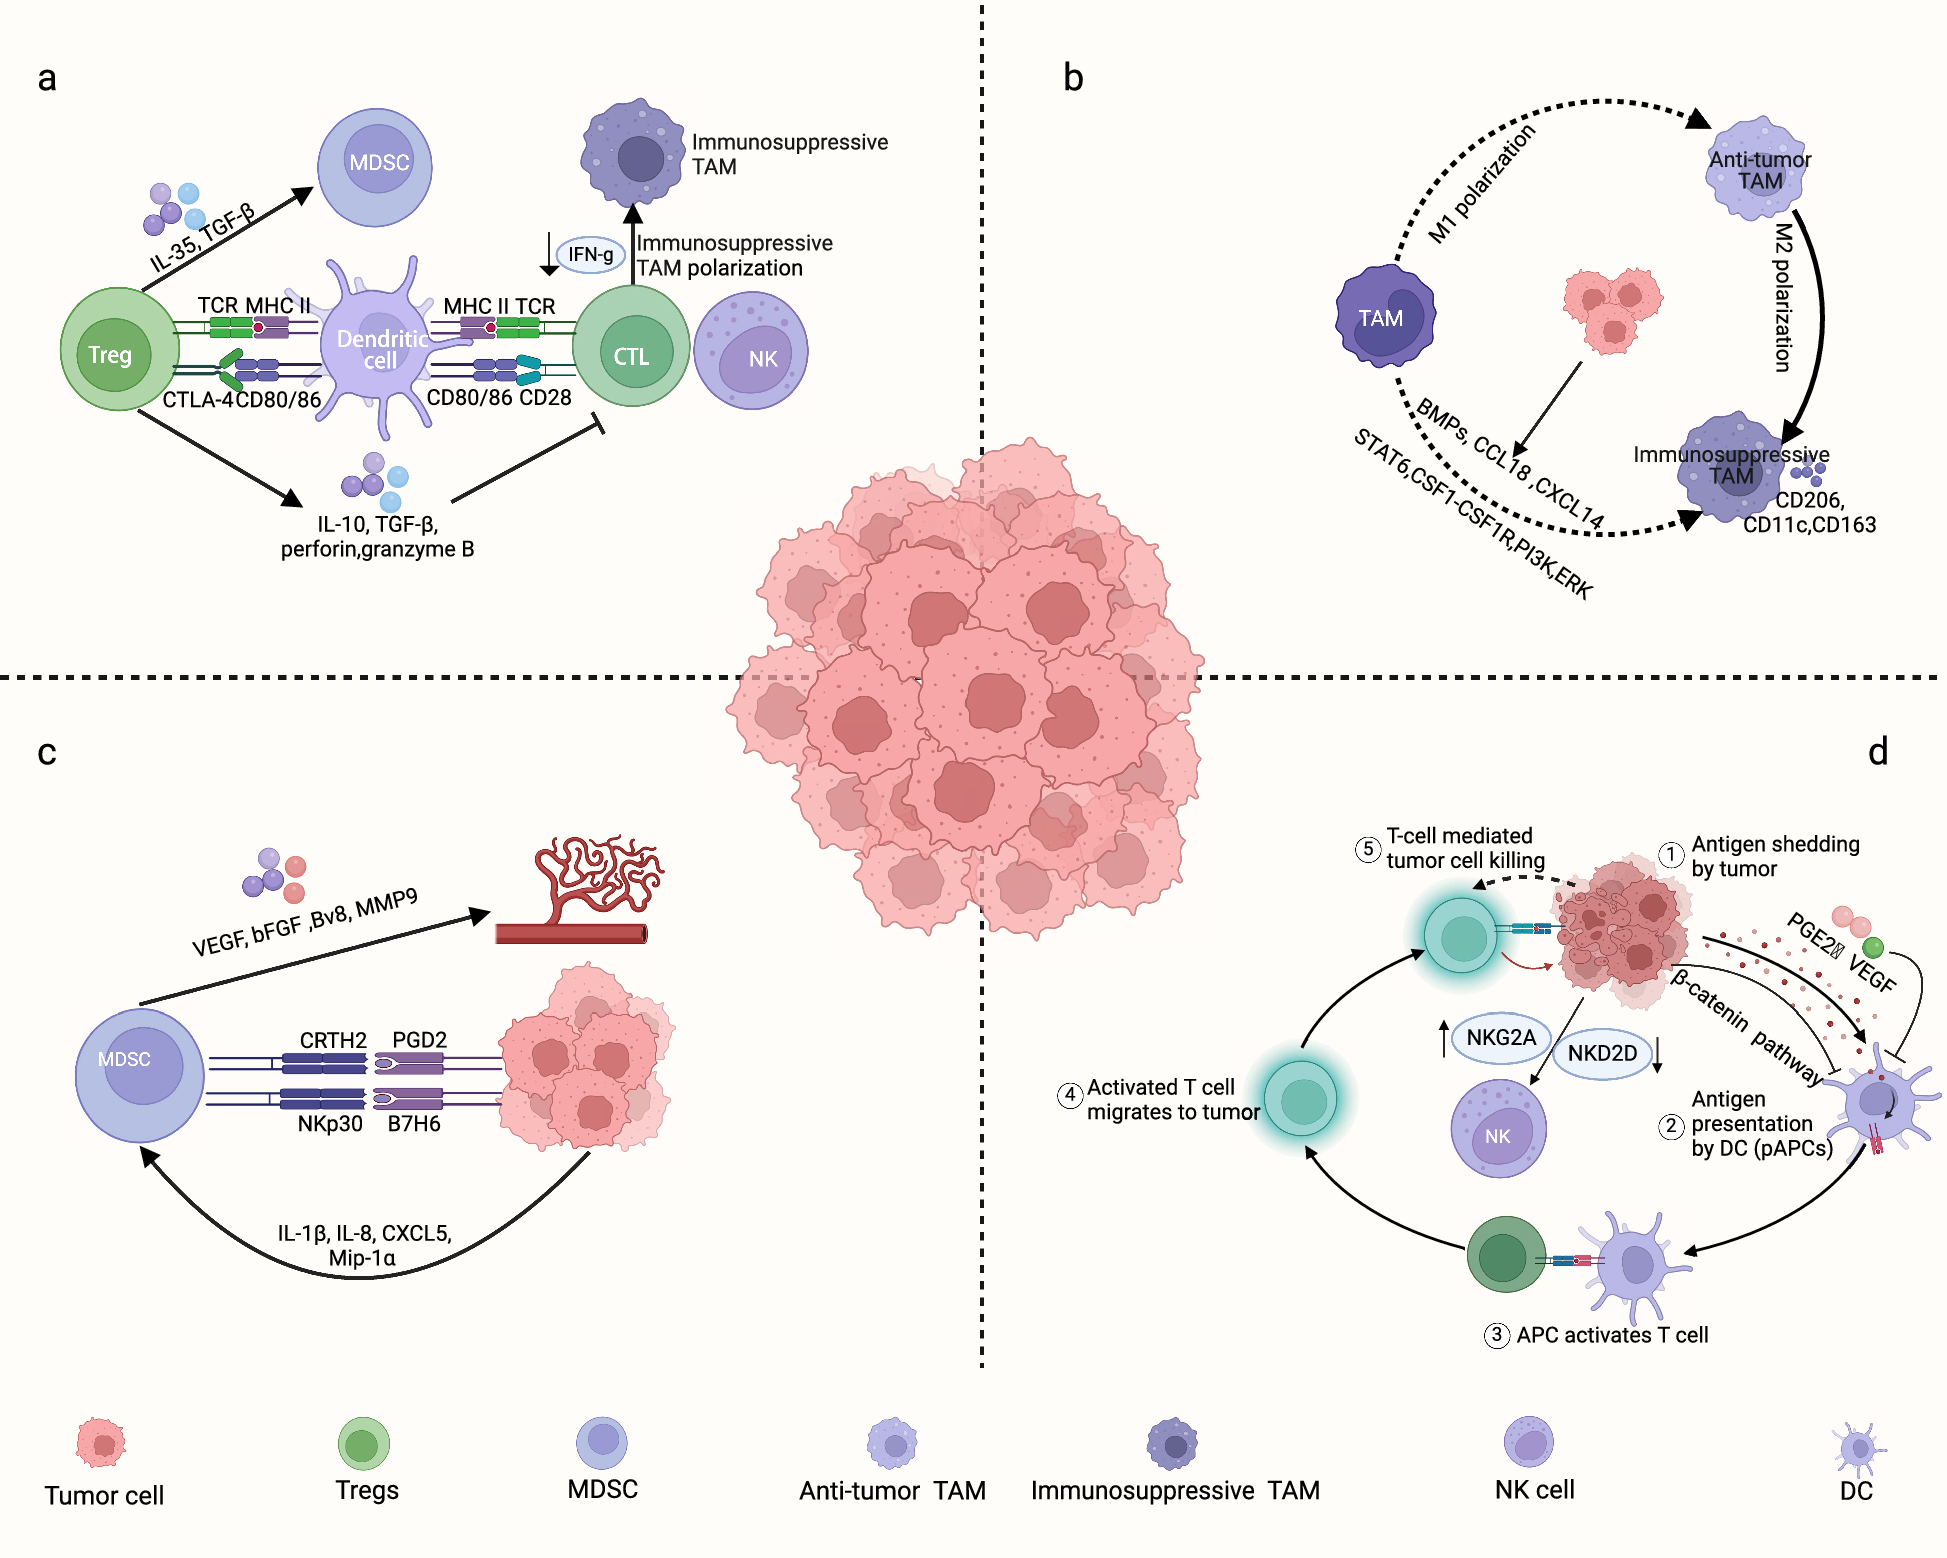 Unravelling immune microenvironment features underlying tumor progression in the single-cell era